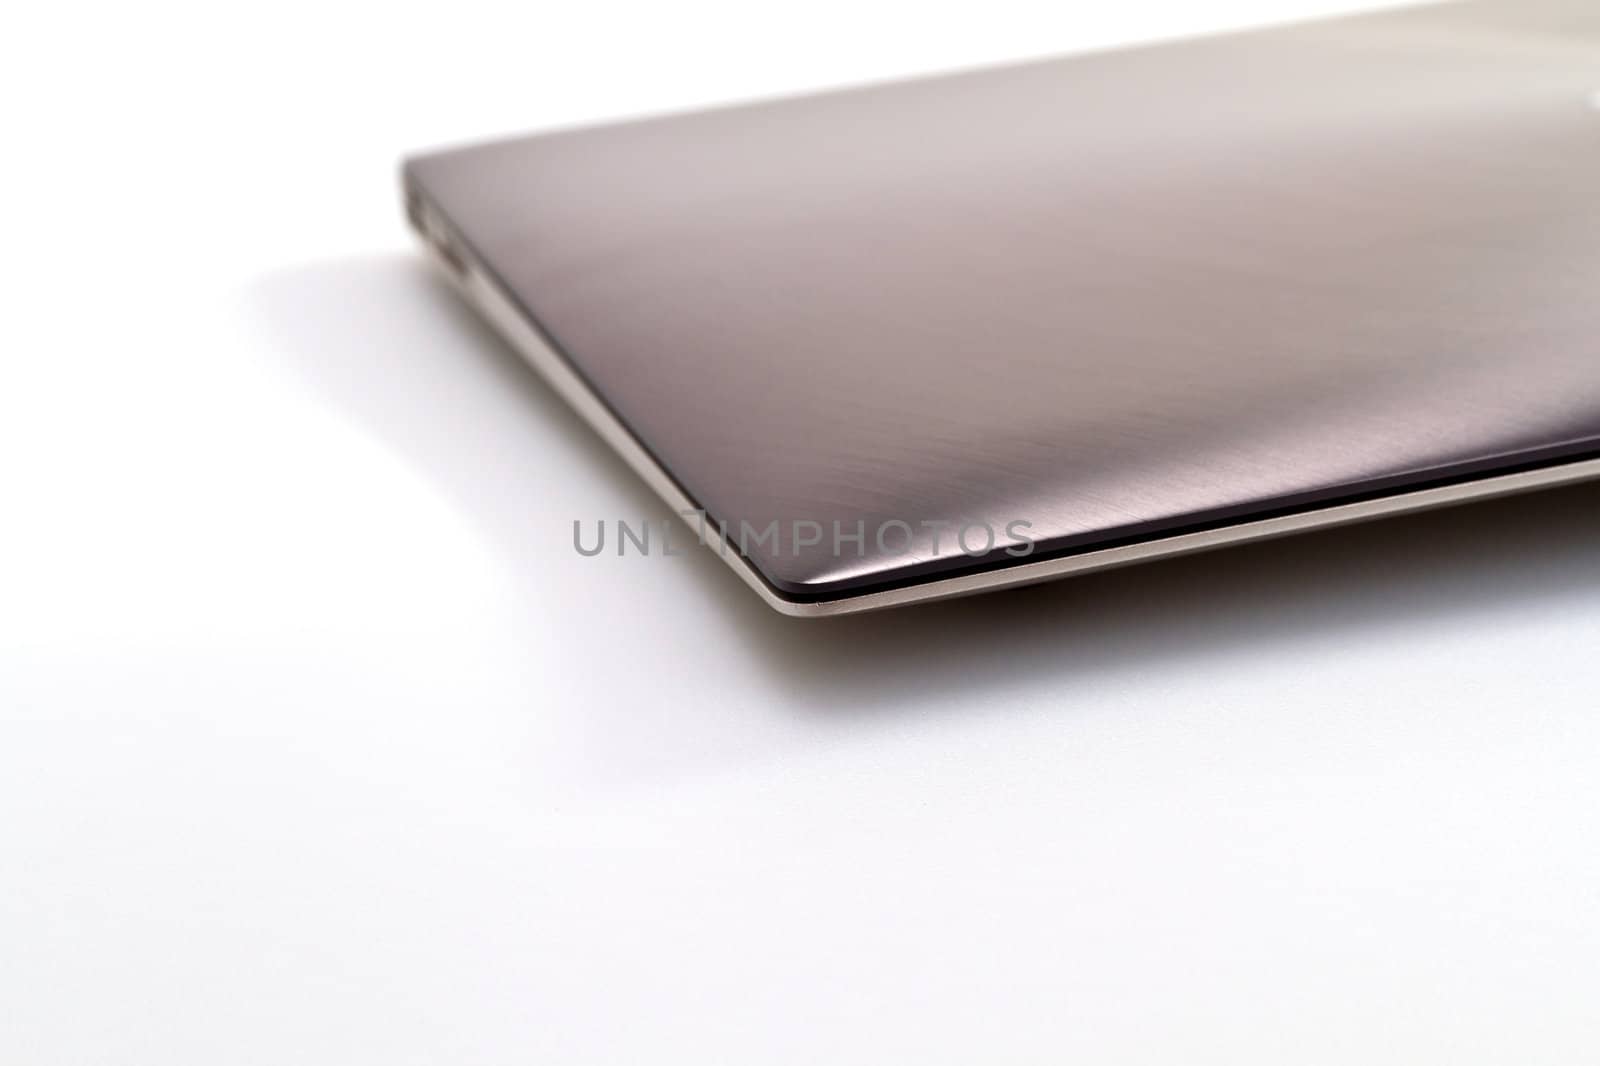 a modern metal laptop with closed lid on white background for abstract background